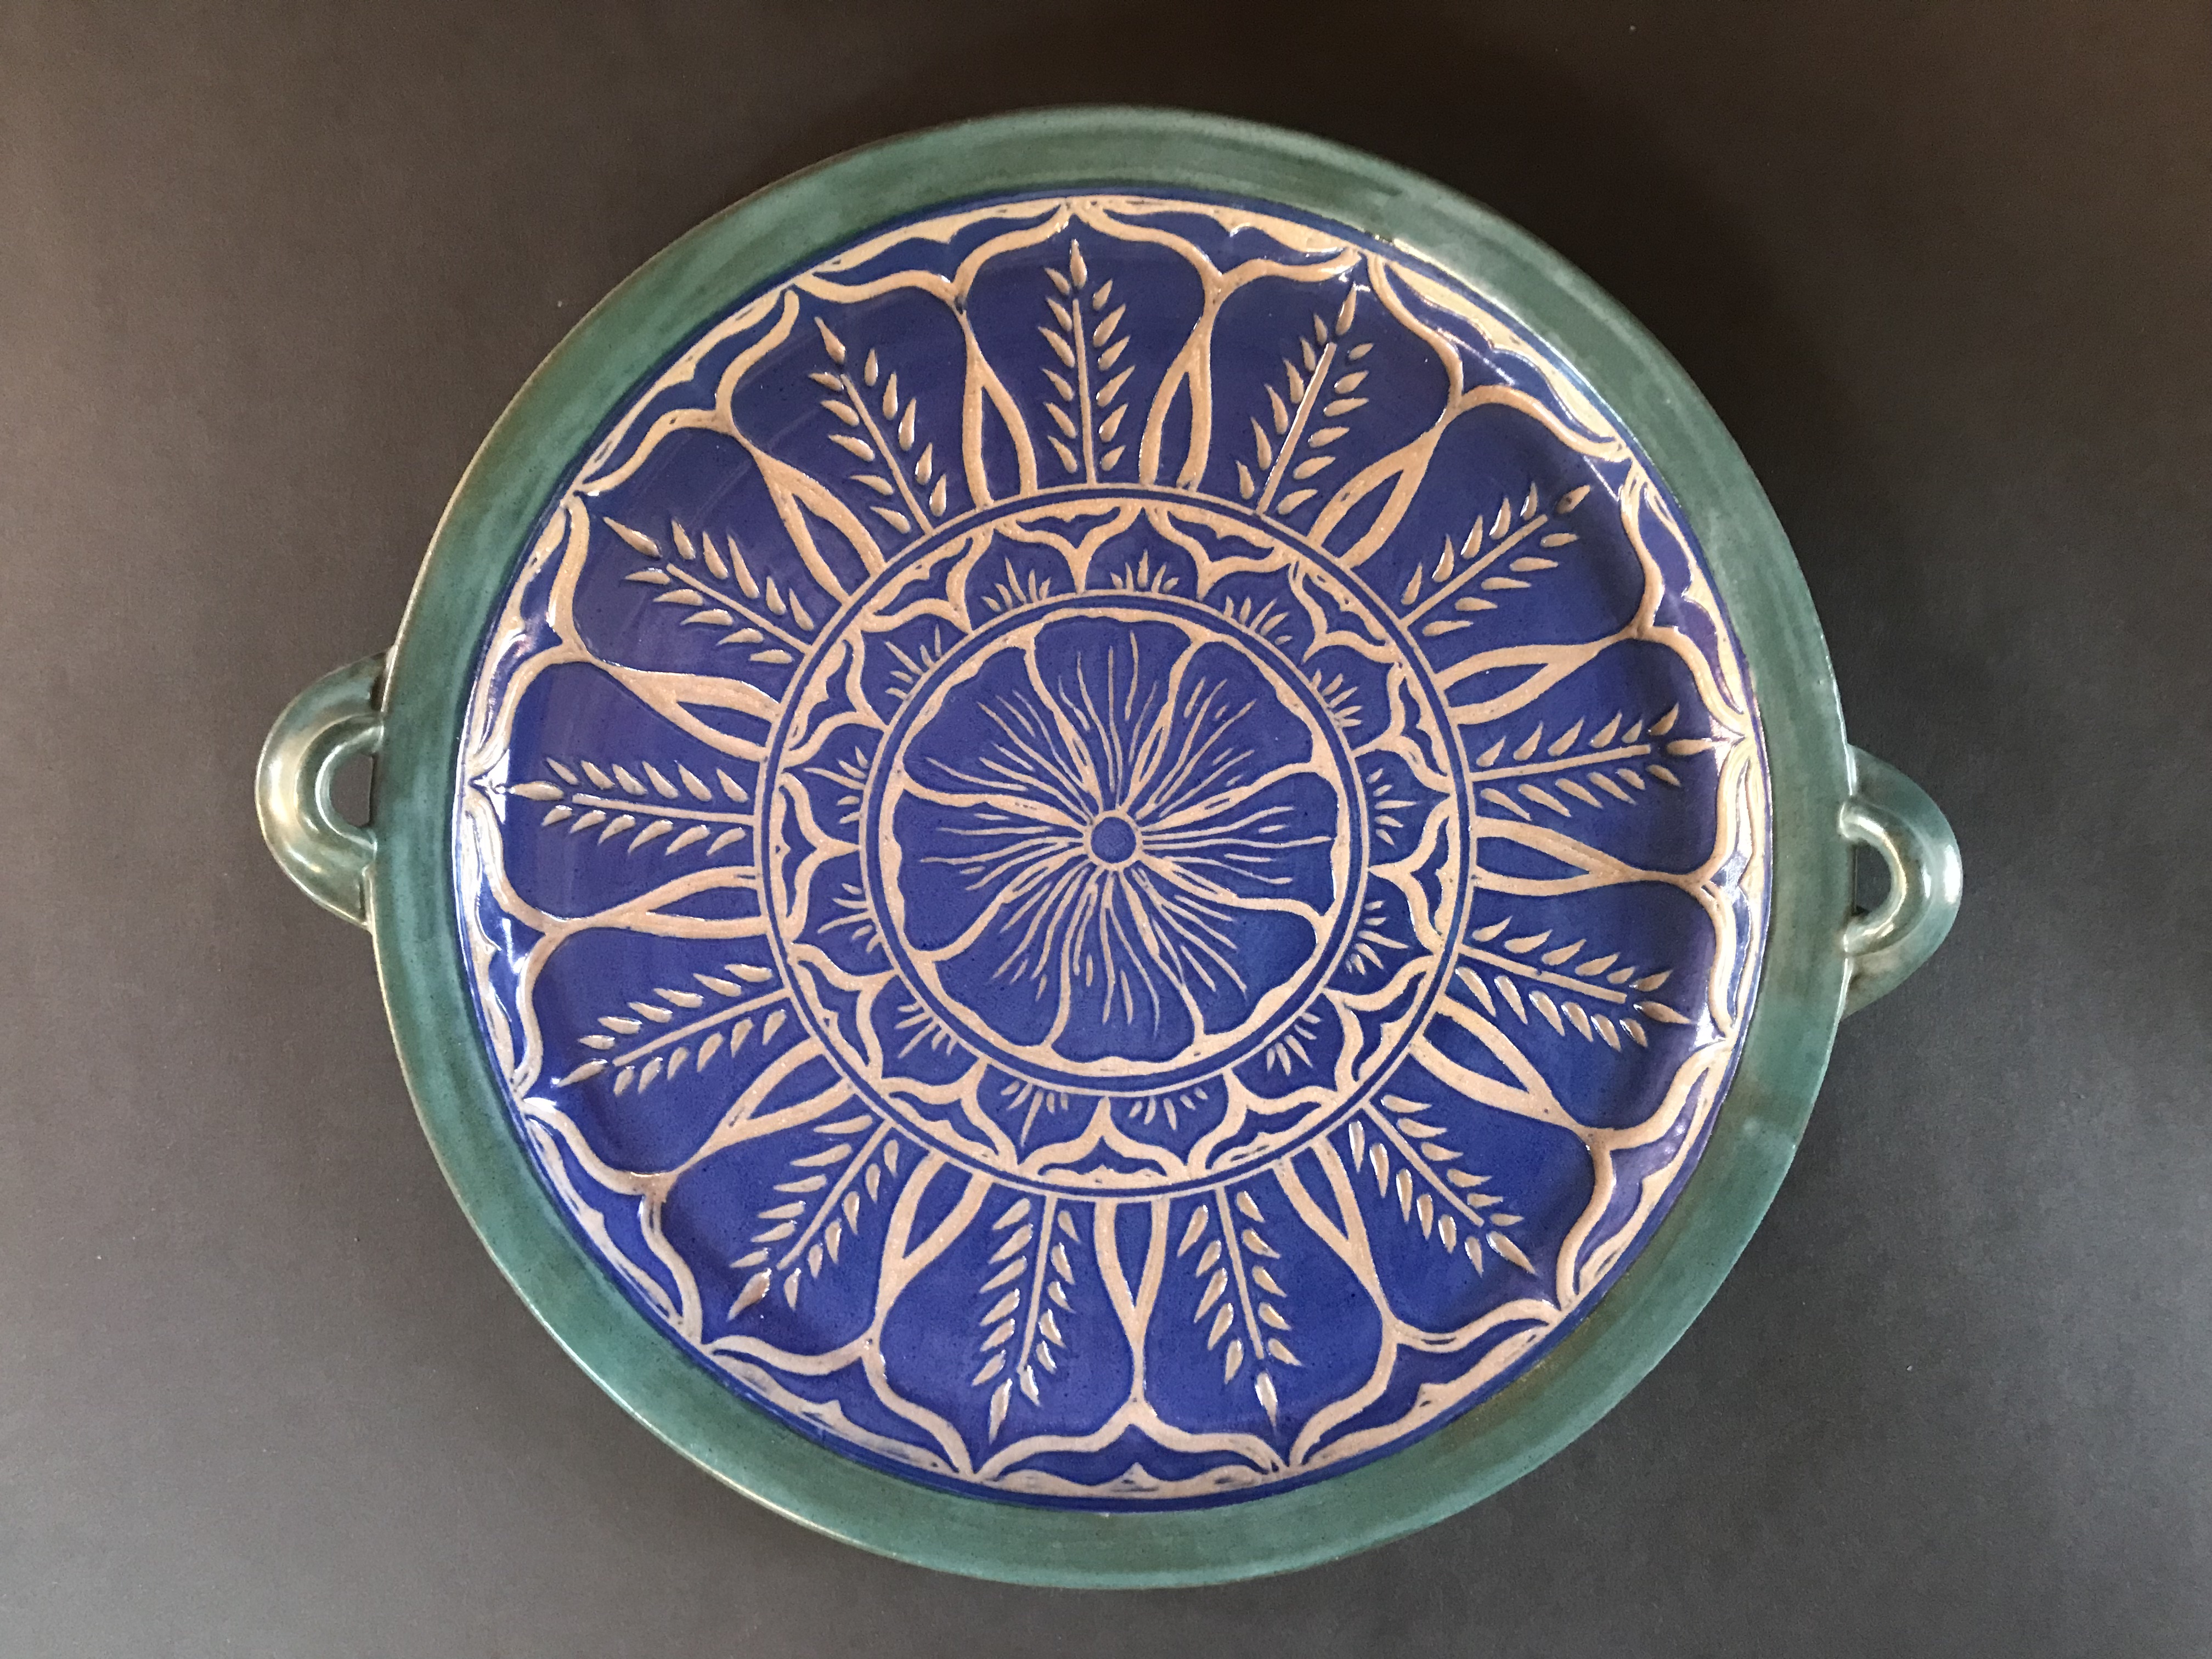 Large Serving Platter In Blue and Turquoise with Sgrafitto Carved Mandala Design